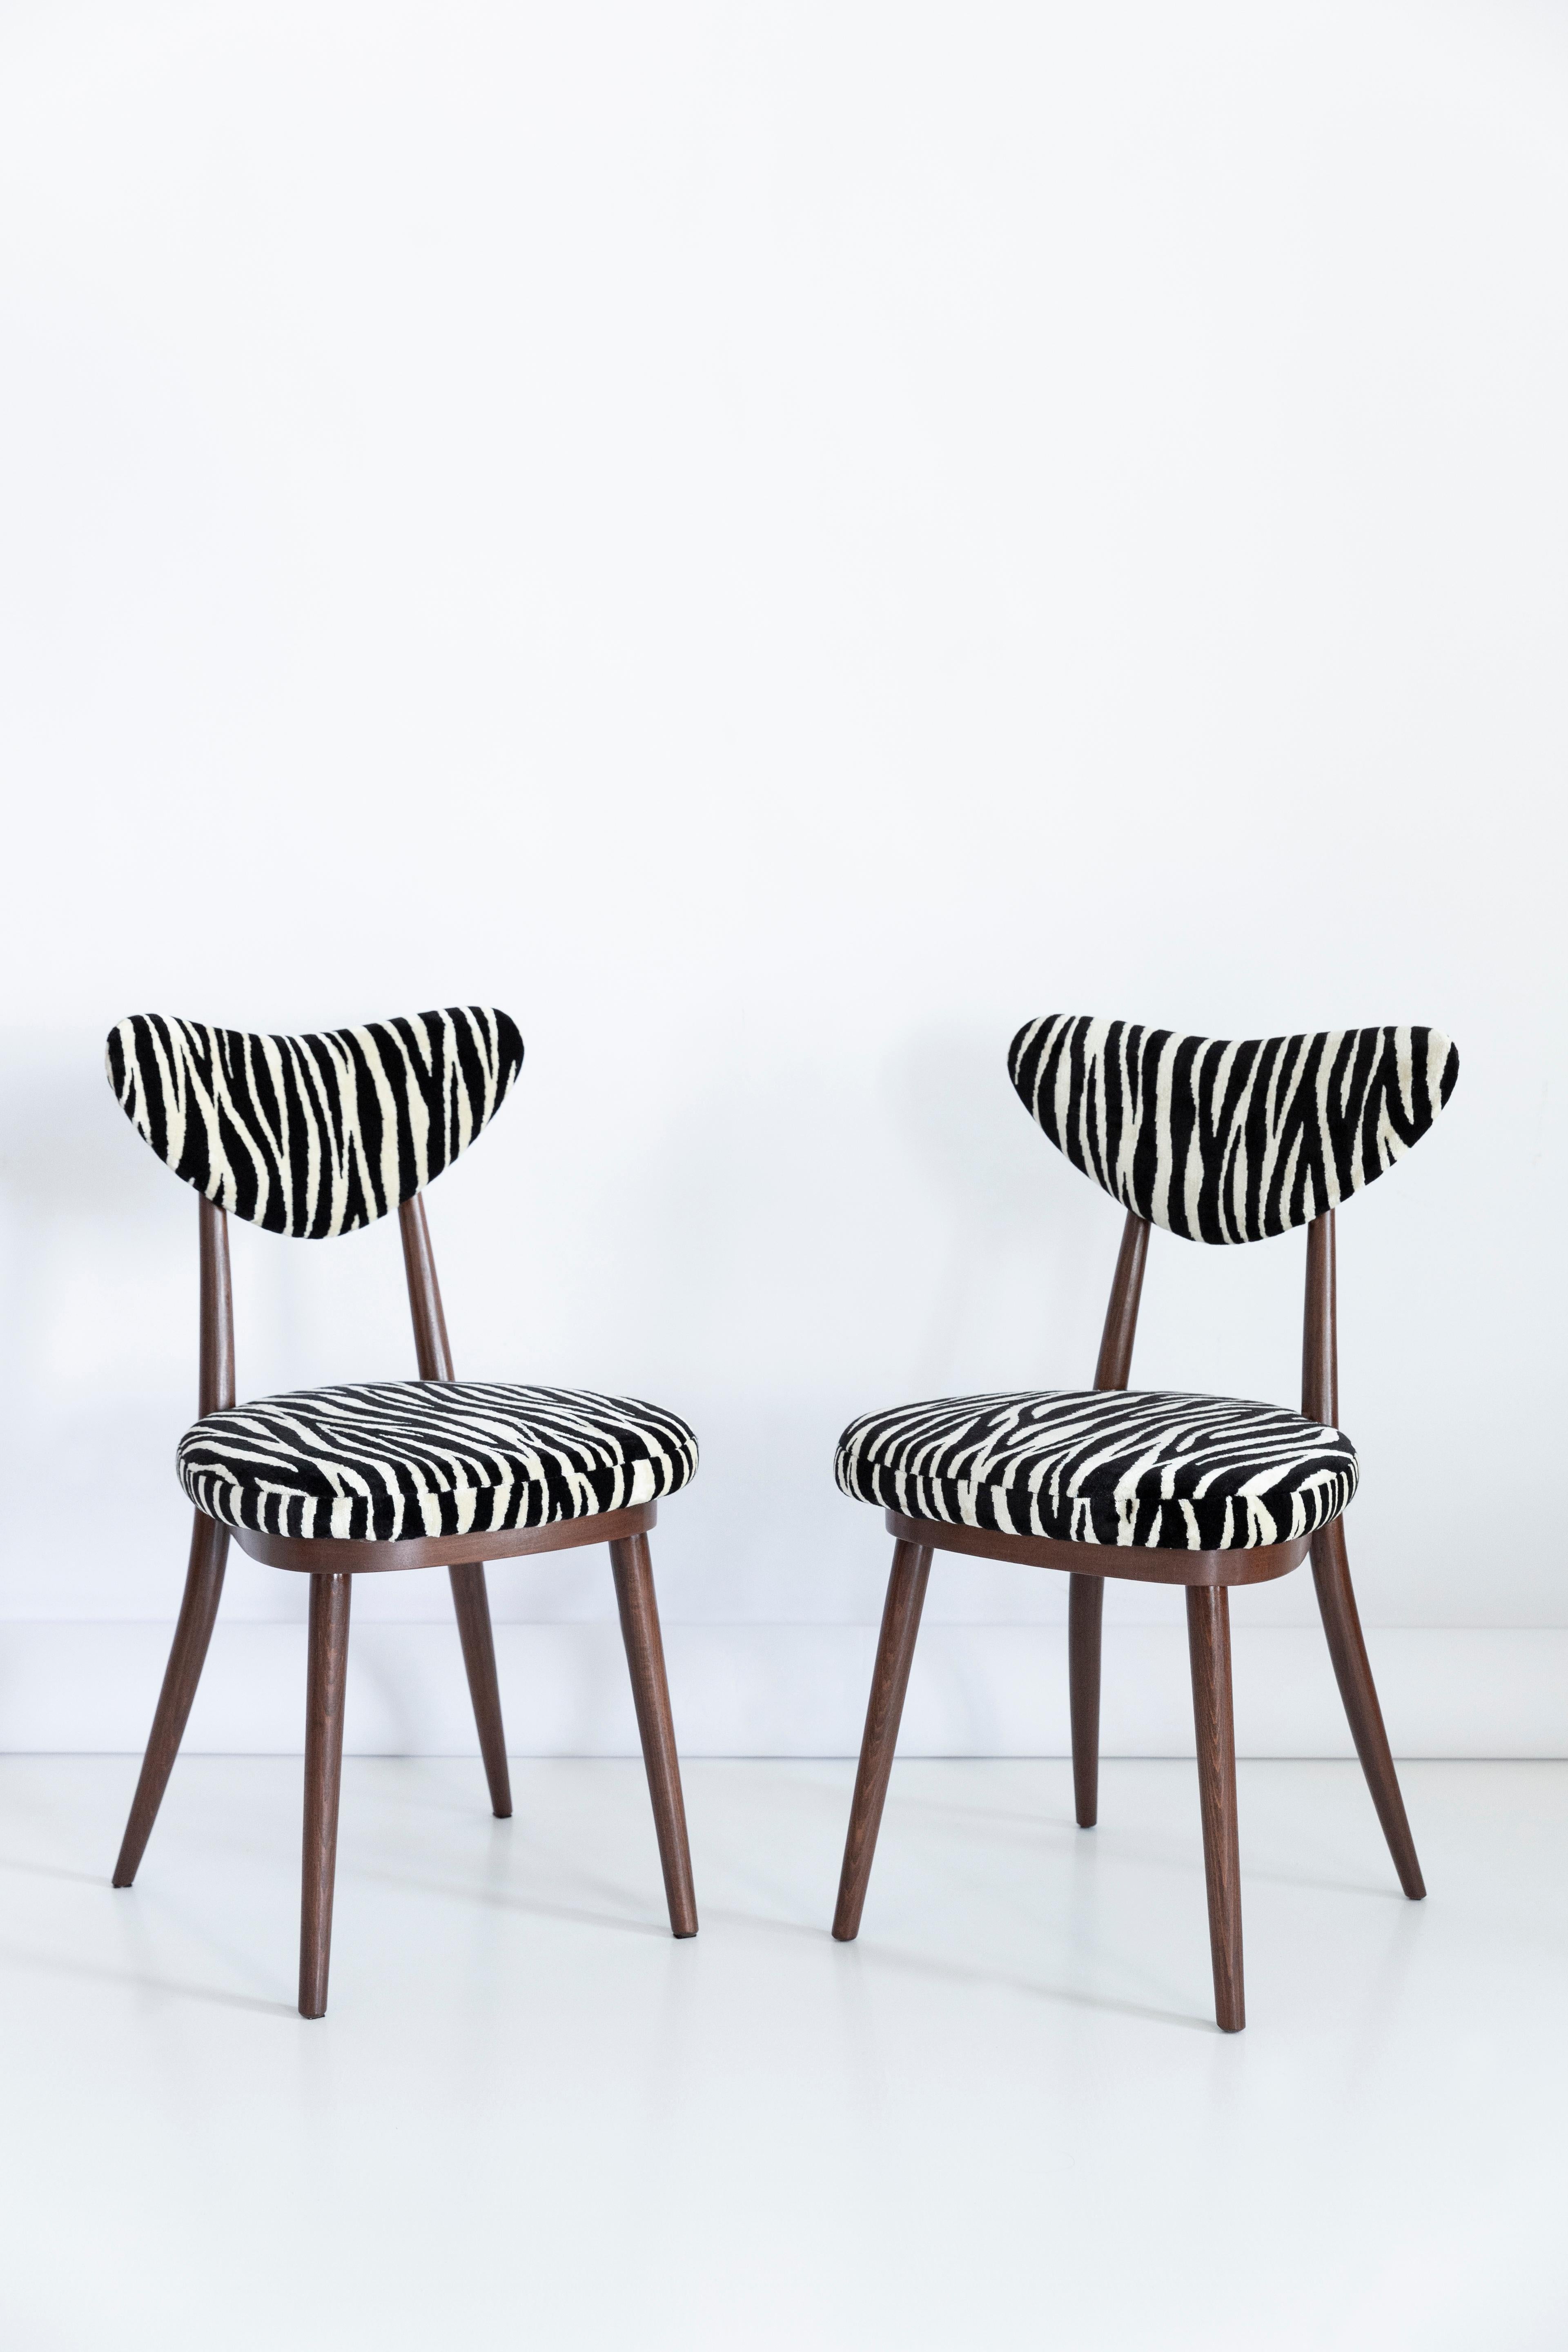 Mid-Century Modern Set of Four Midcentury Zebra Black and White Heart Chairs, Poland, 1960s For Sale